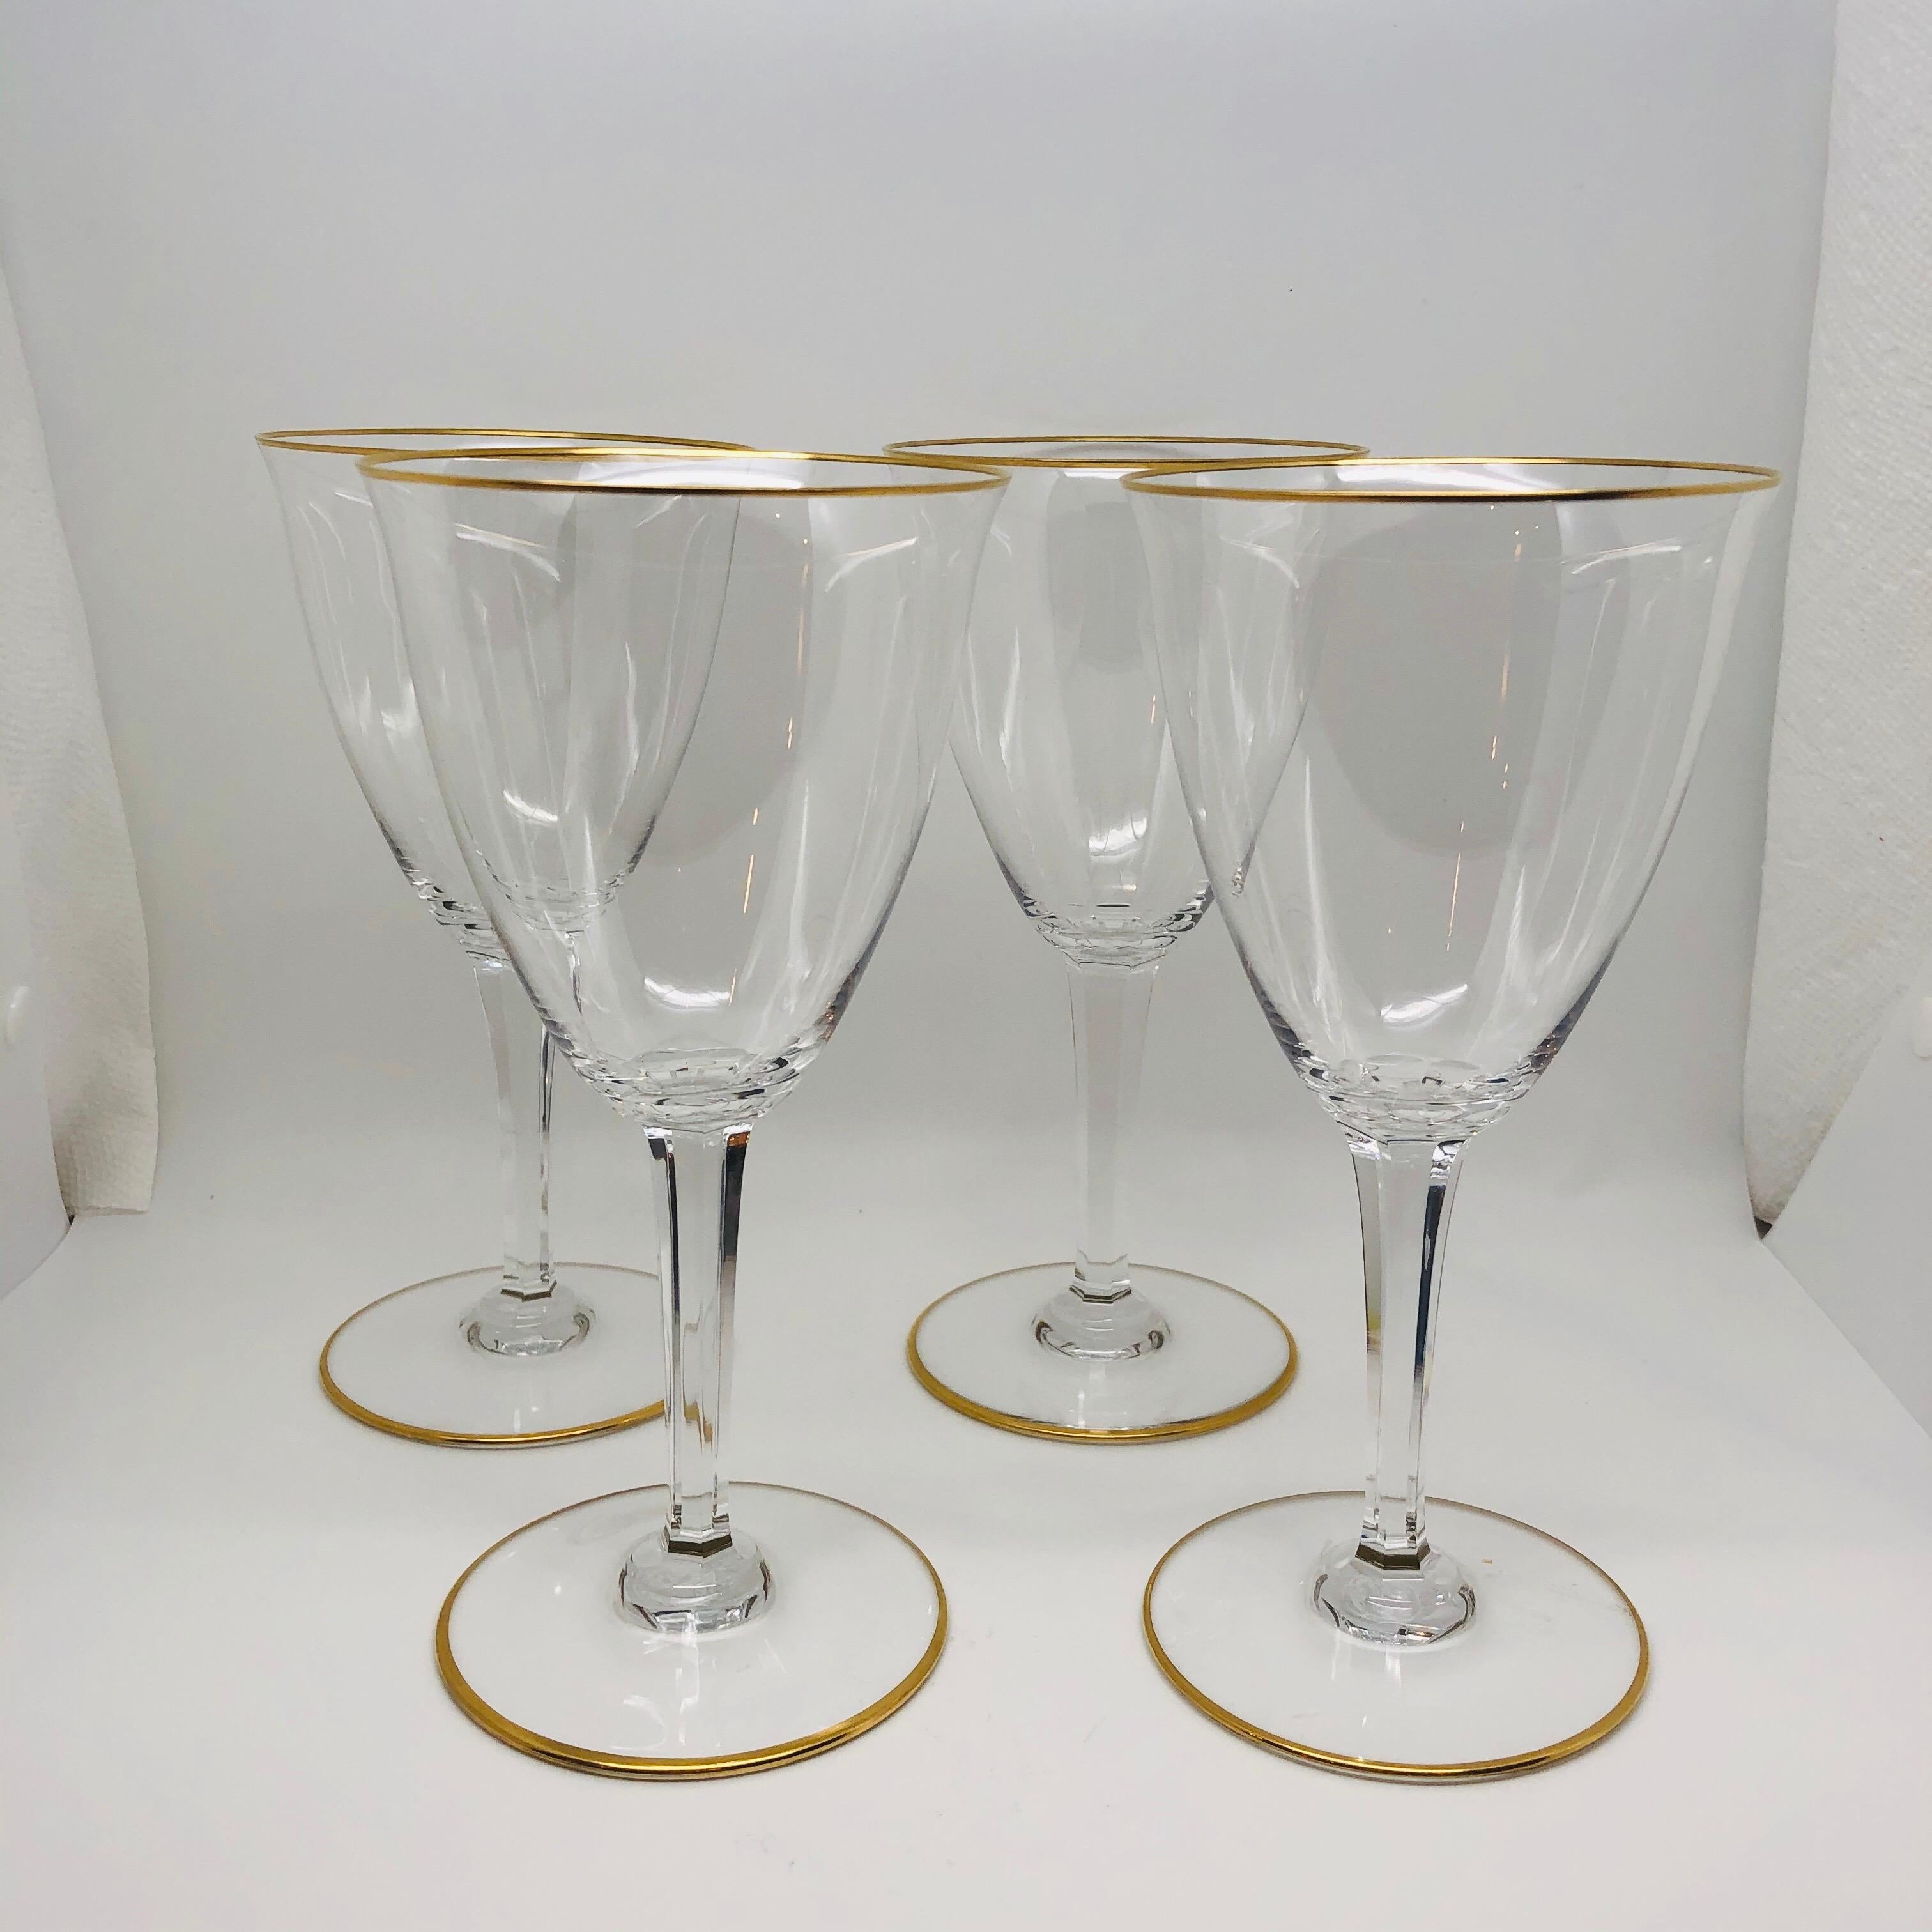 Set of twelve signed Baccarat goblets with gold trimmed tops and bottoms. They are in excellent condition. They are a perfect goblet to serve your special vintage wine. Their form is an example of simple elegance. They are 7 1/2 inches tall and the